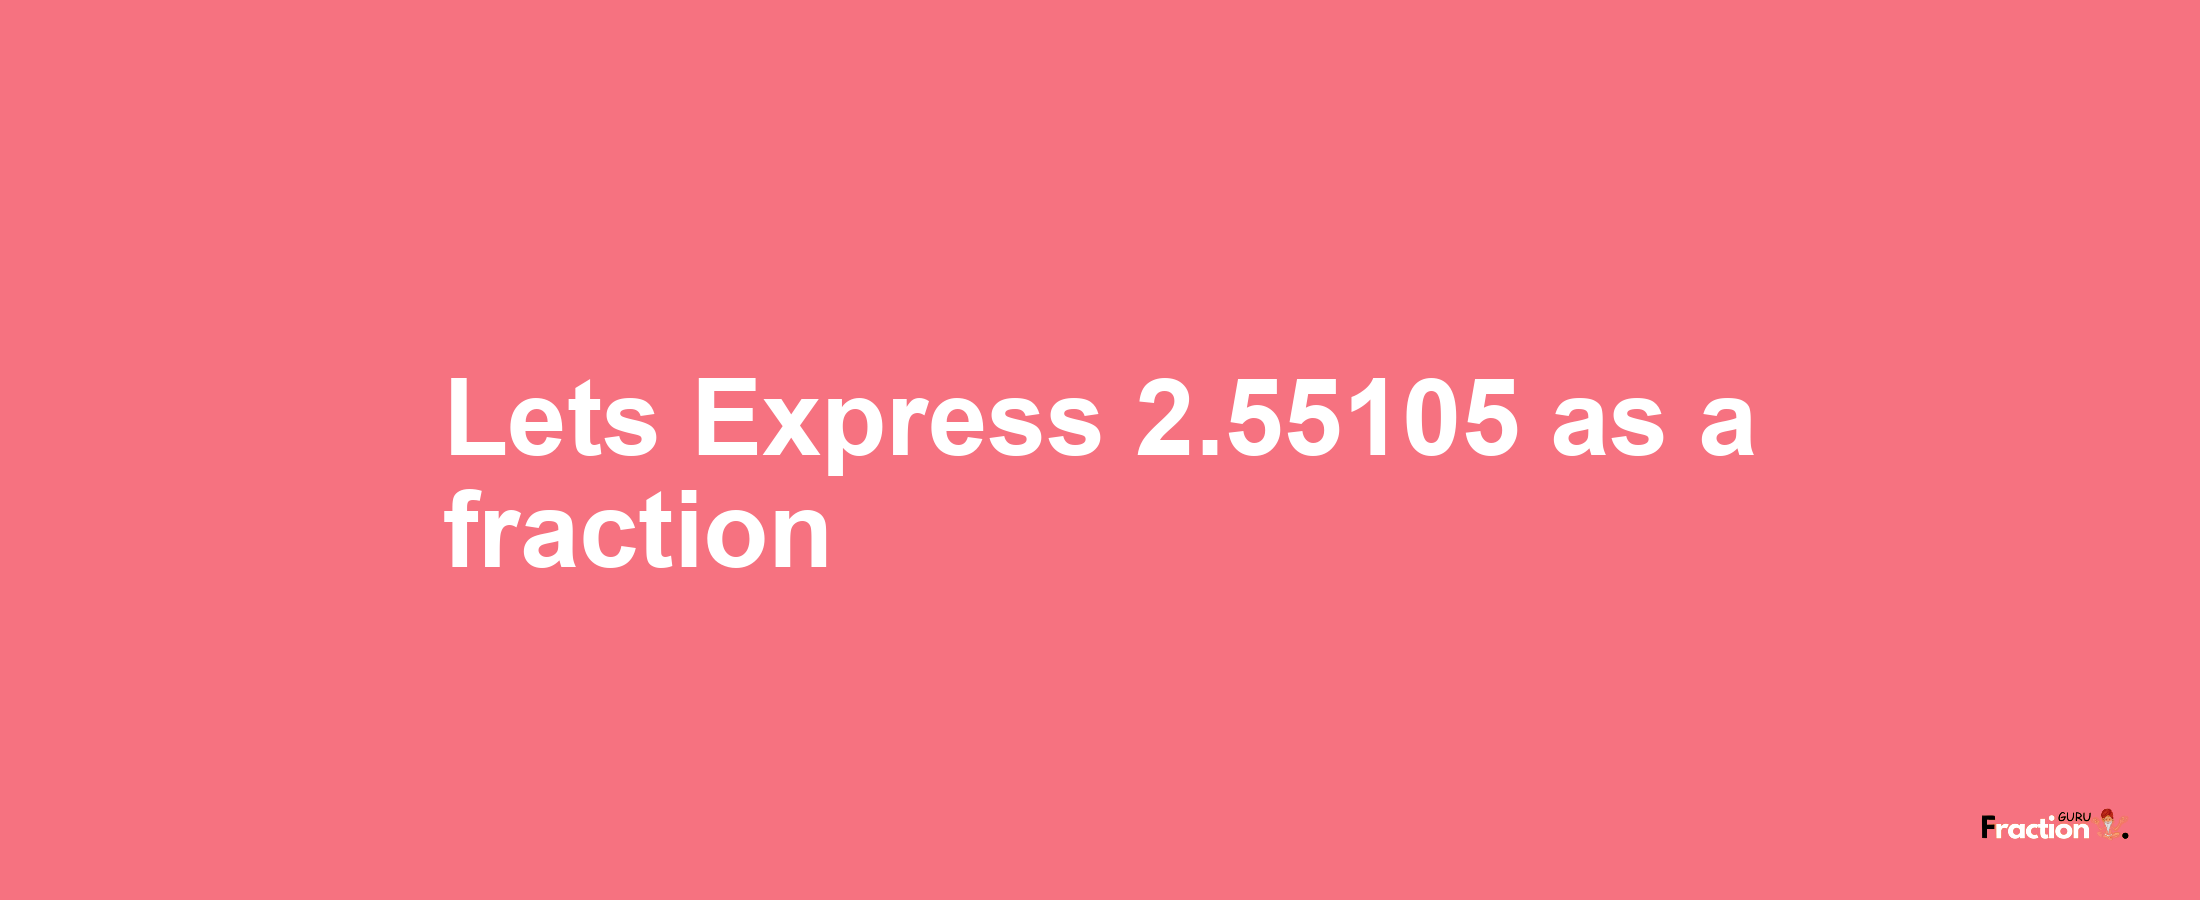 Lets Express 2.55105 as afraction